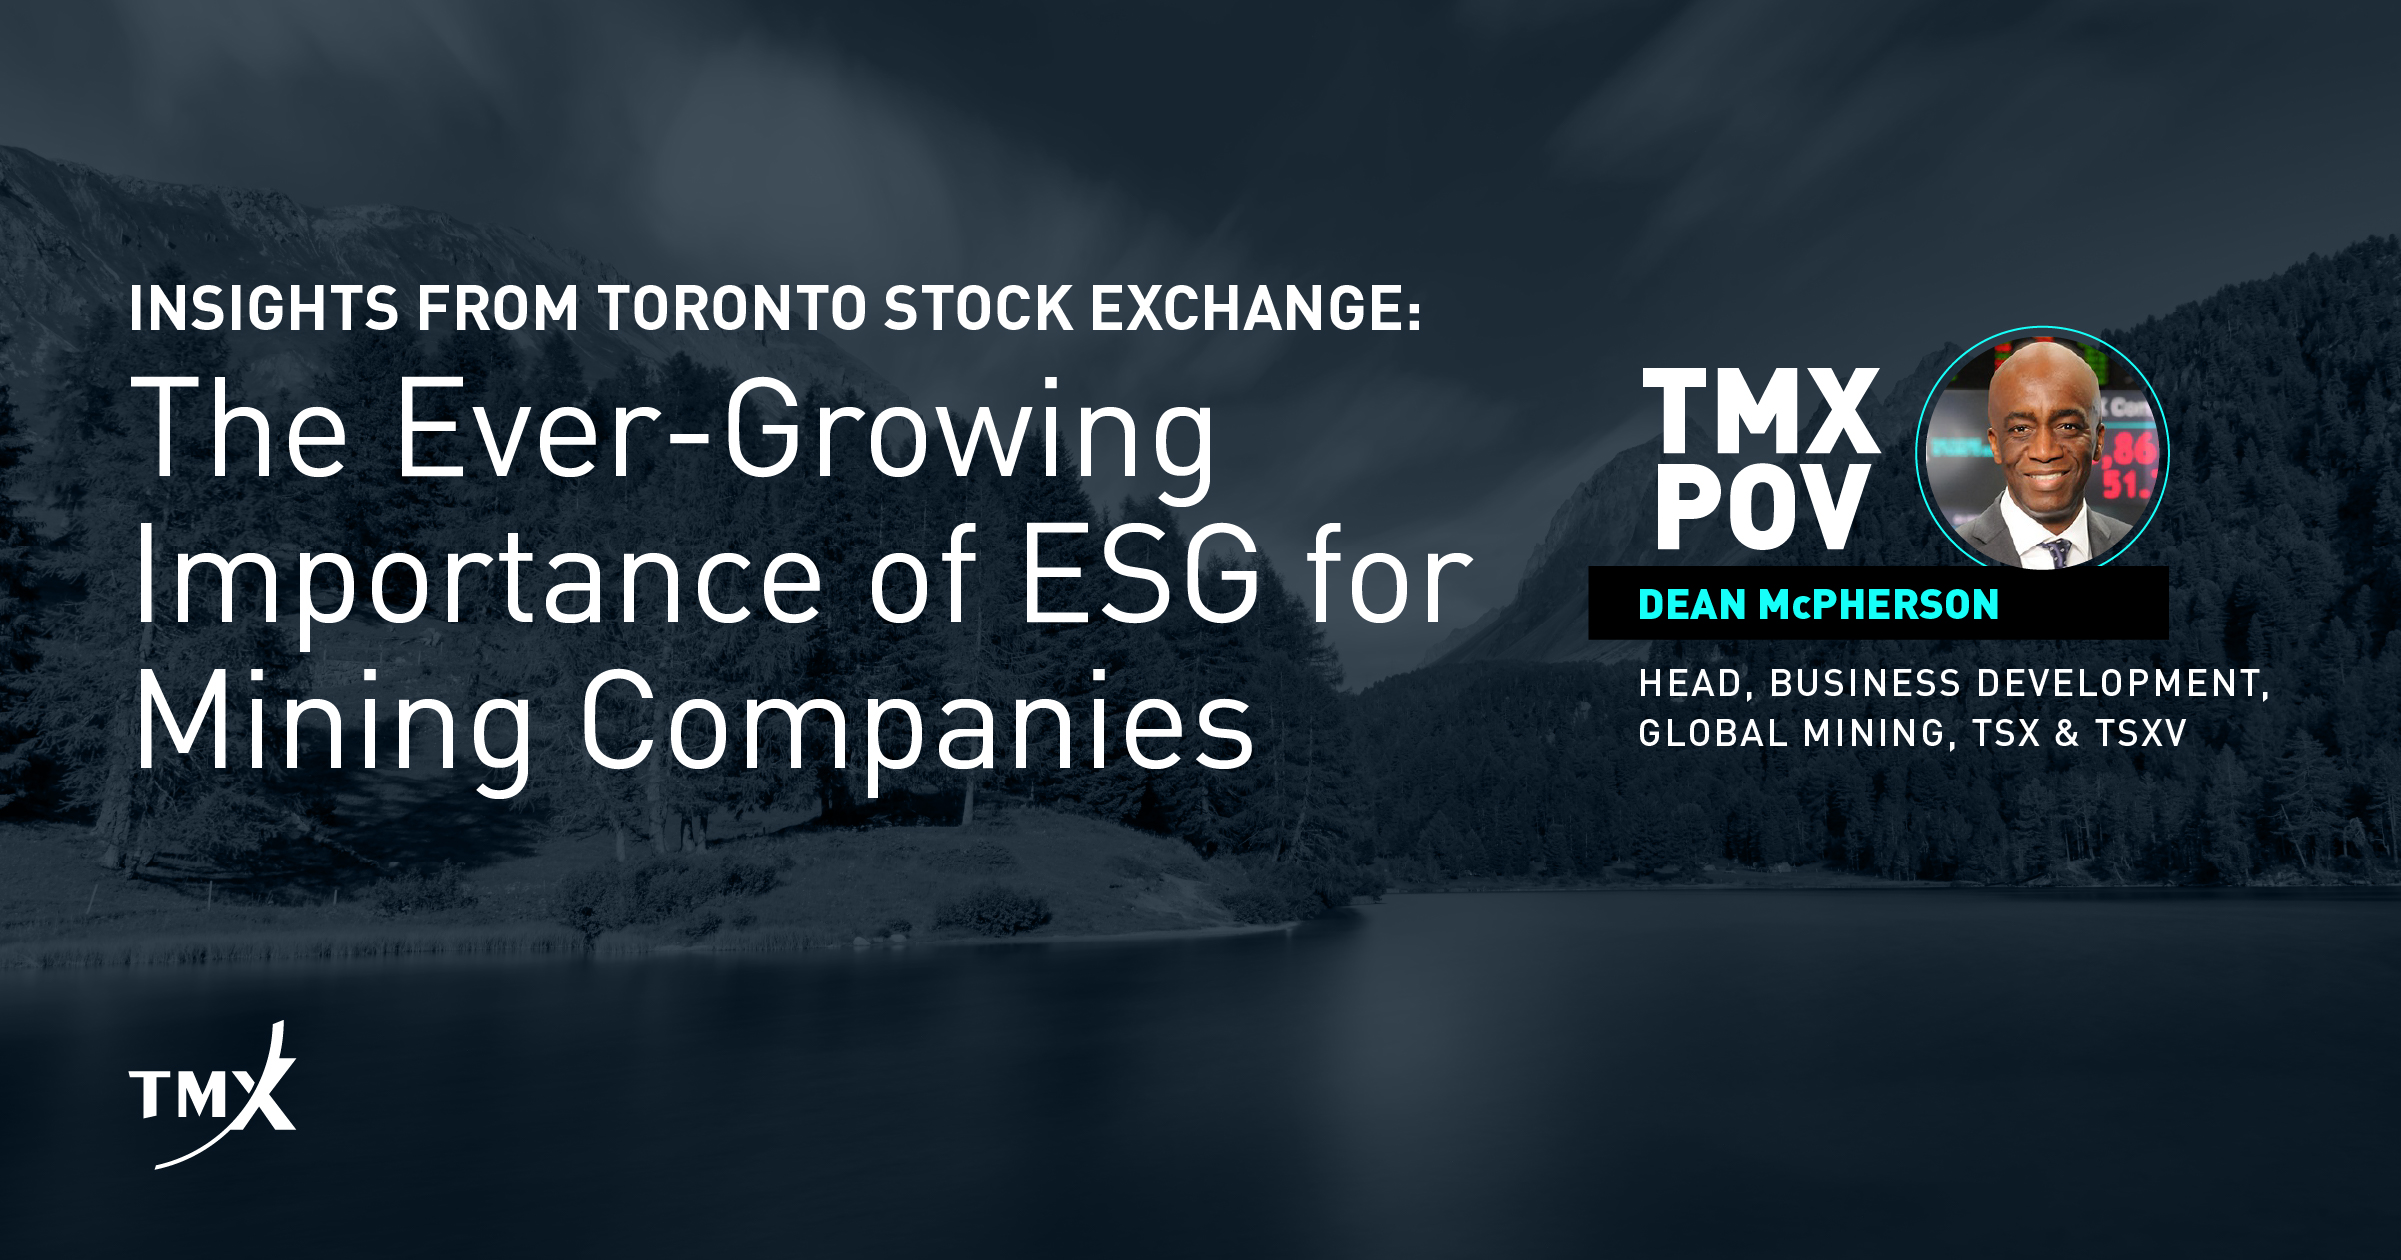 TMX POV - The ever-growing importance of ESG for mining companies: Insights from Toronto Stock Exchange